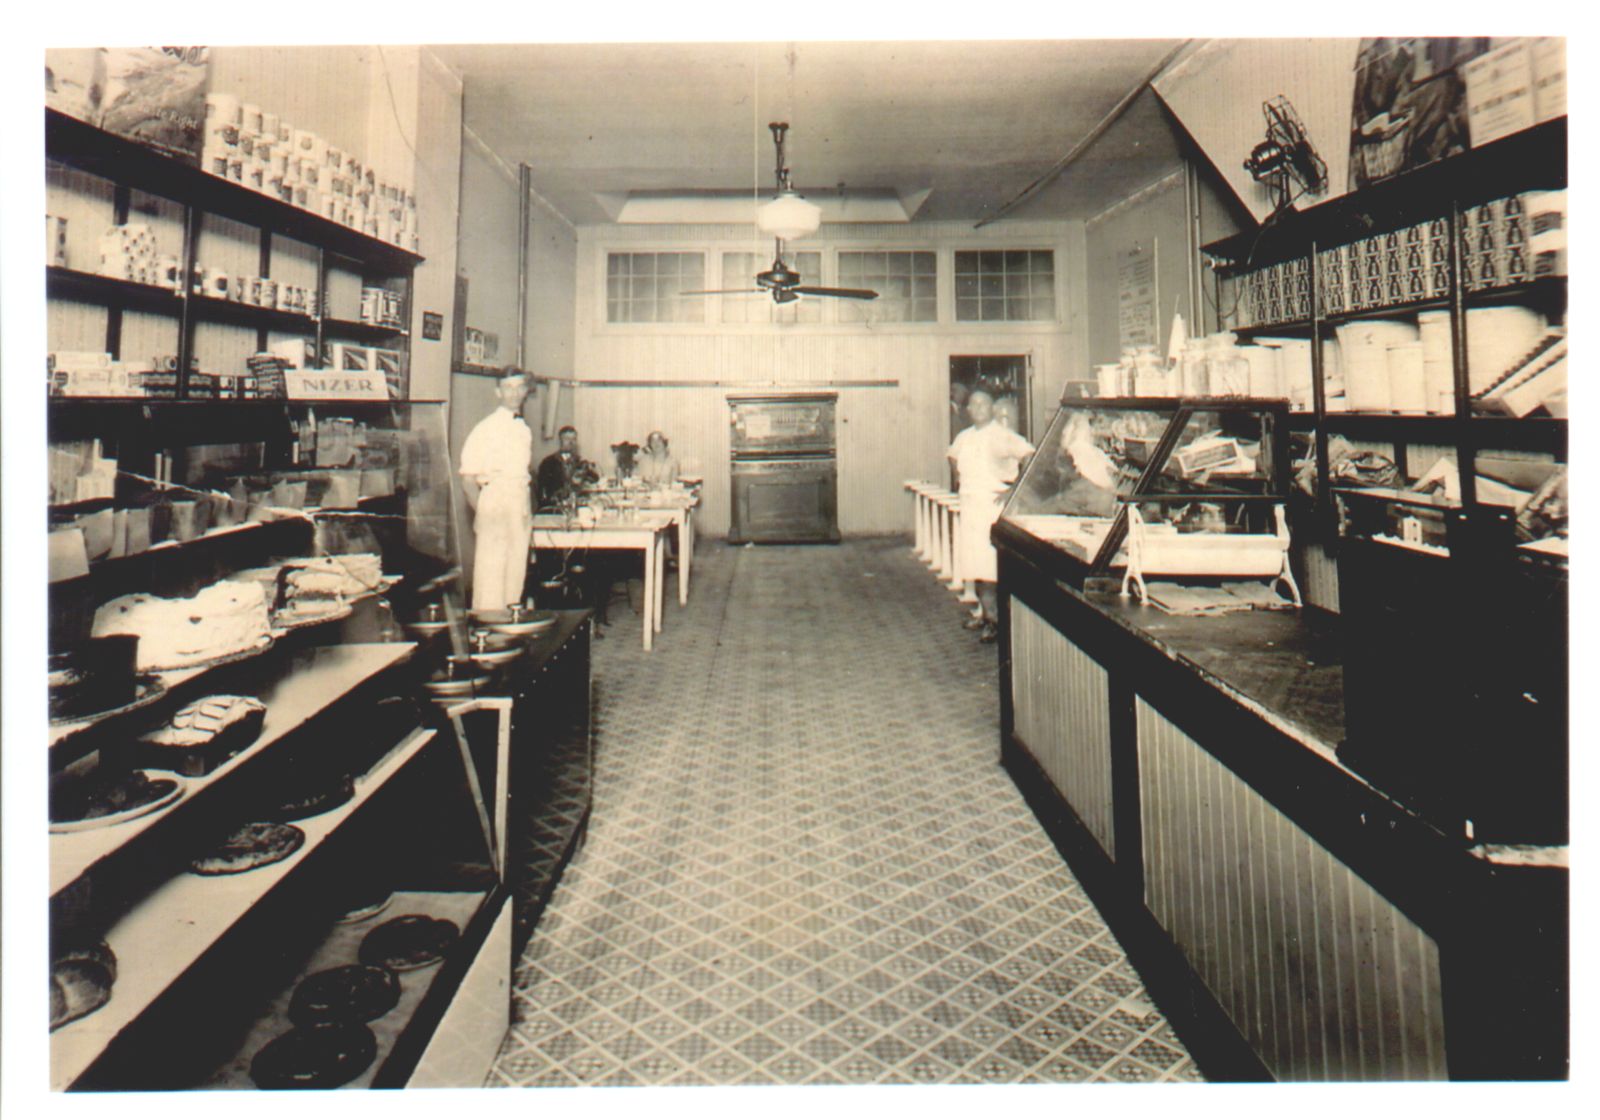 My great-grandfather's Bakery & Cafe on 7th & O Sts. NW, Washington, DC.  He's in the back, on the right.  This was taken ca. 1920. View full size.